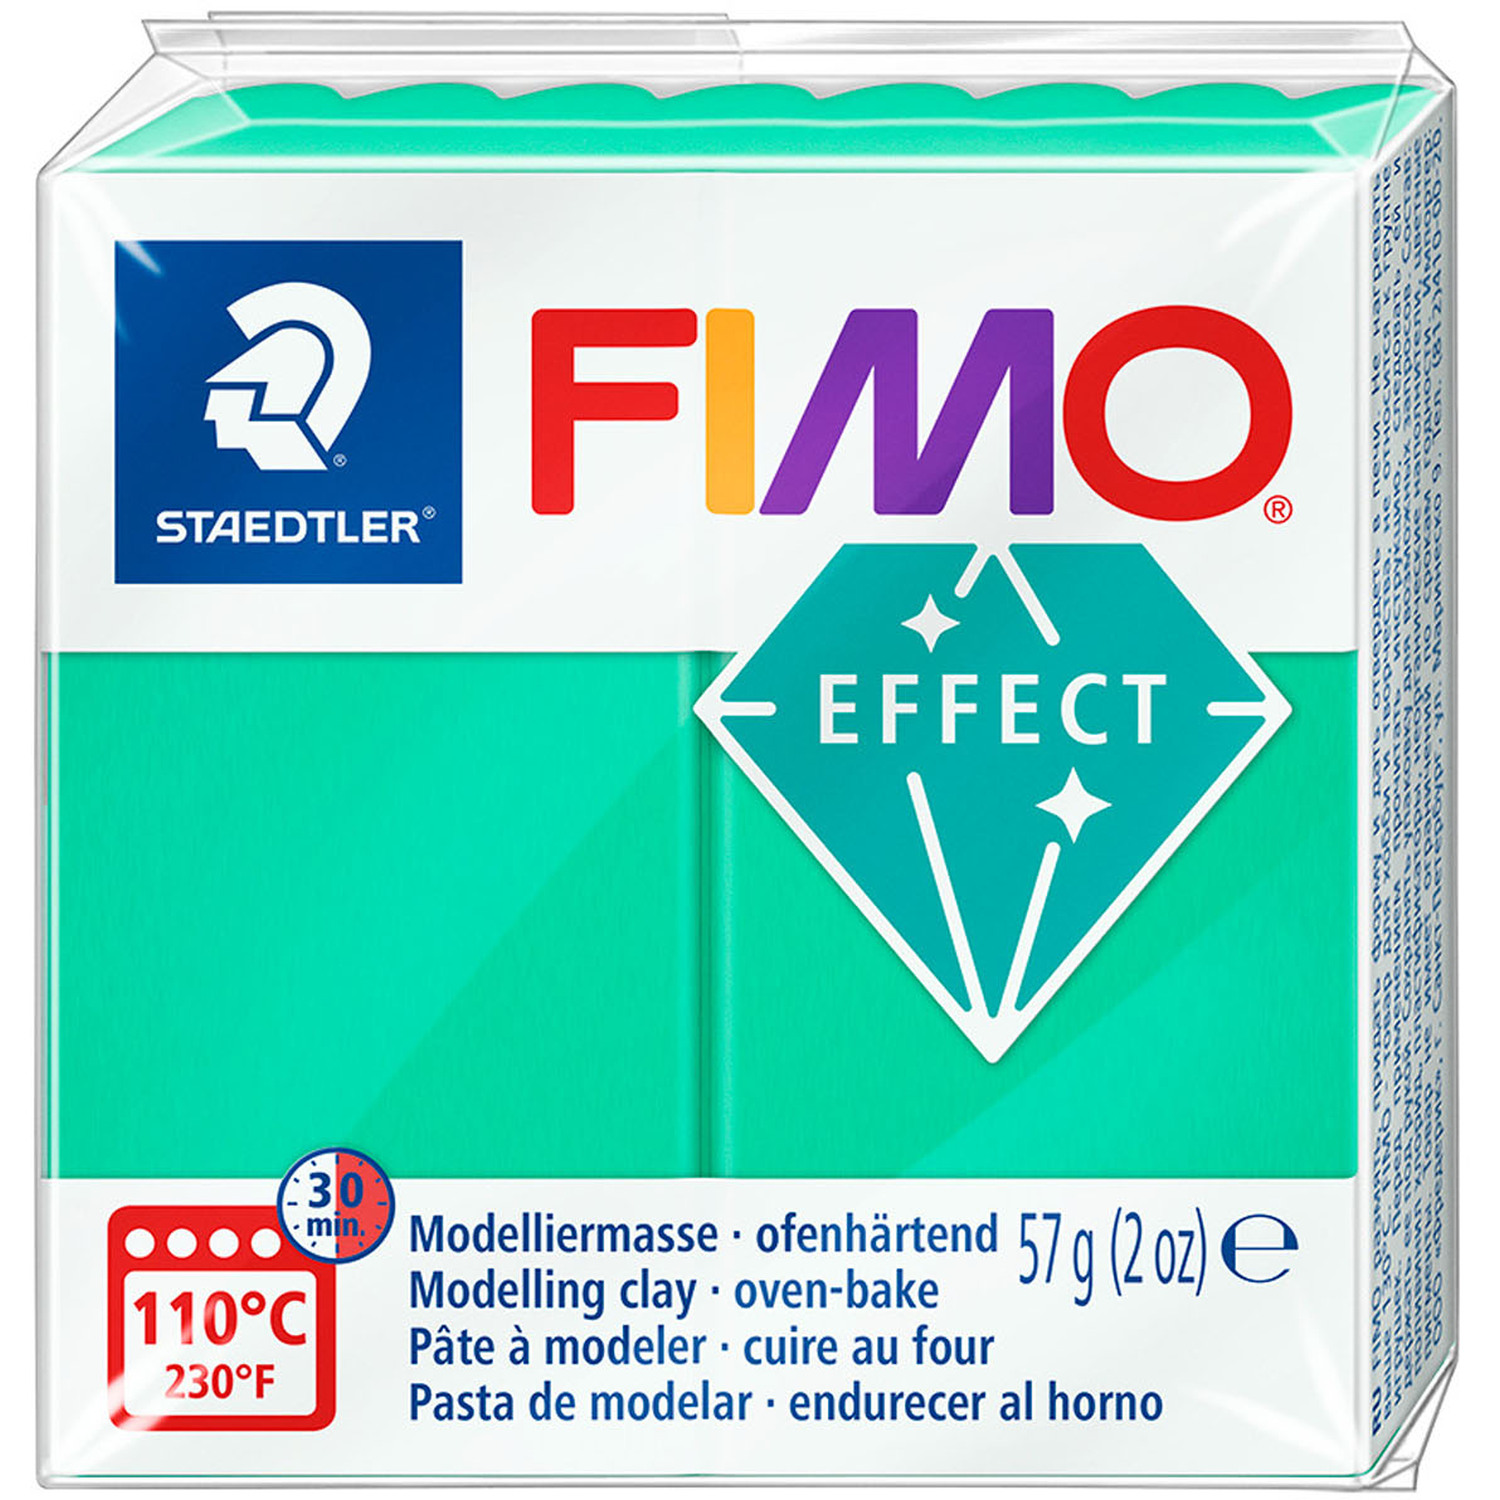 Staedtler FIMO Effect Modelling Clay Block - Translucent Green Image 1